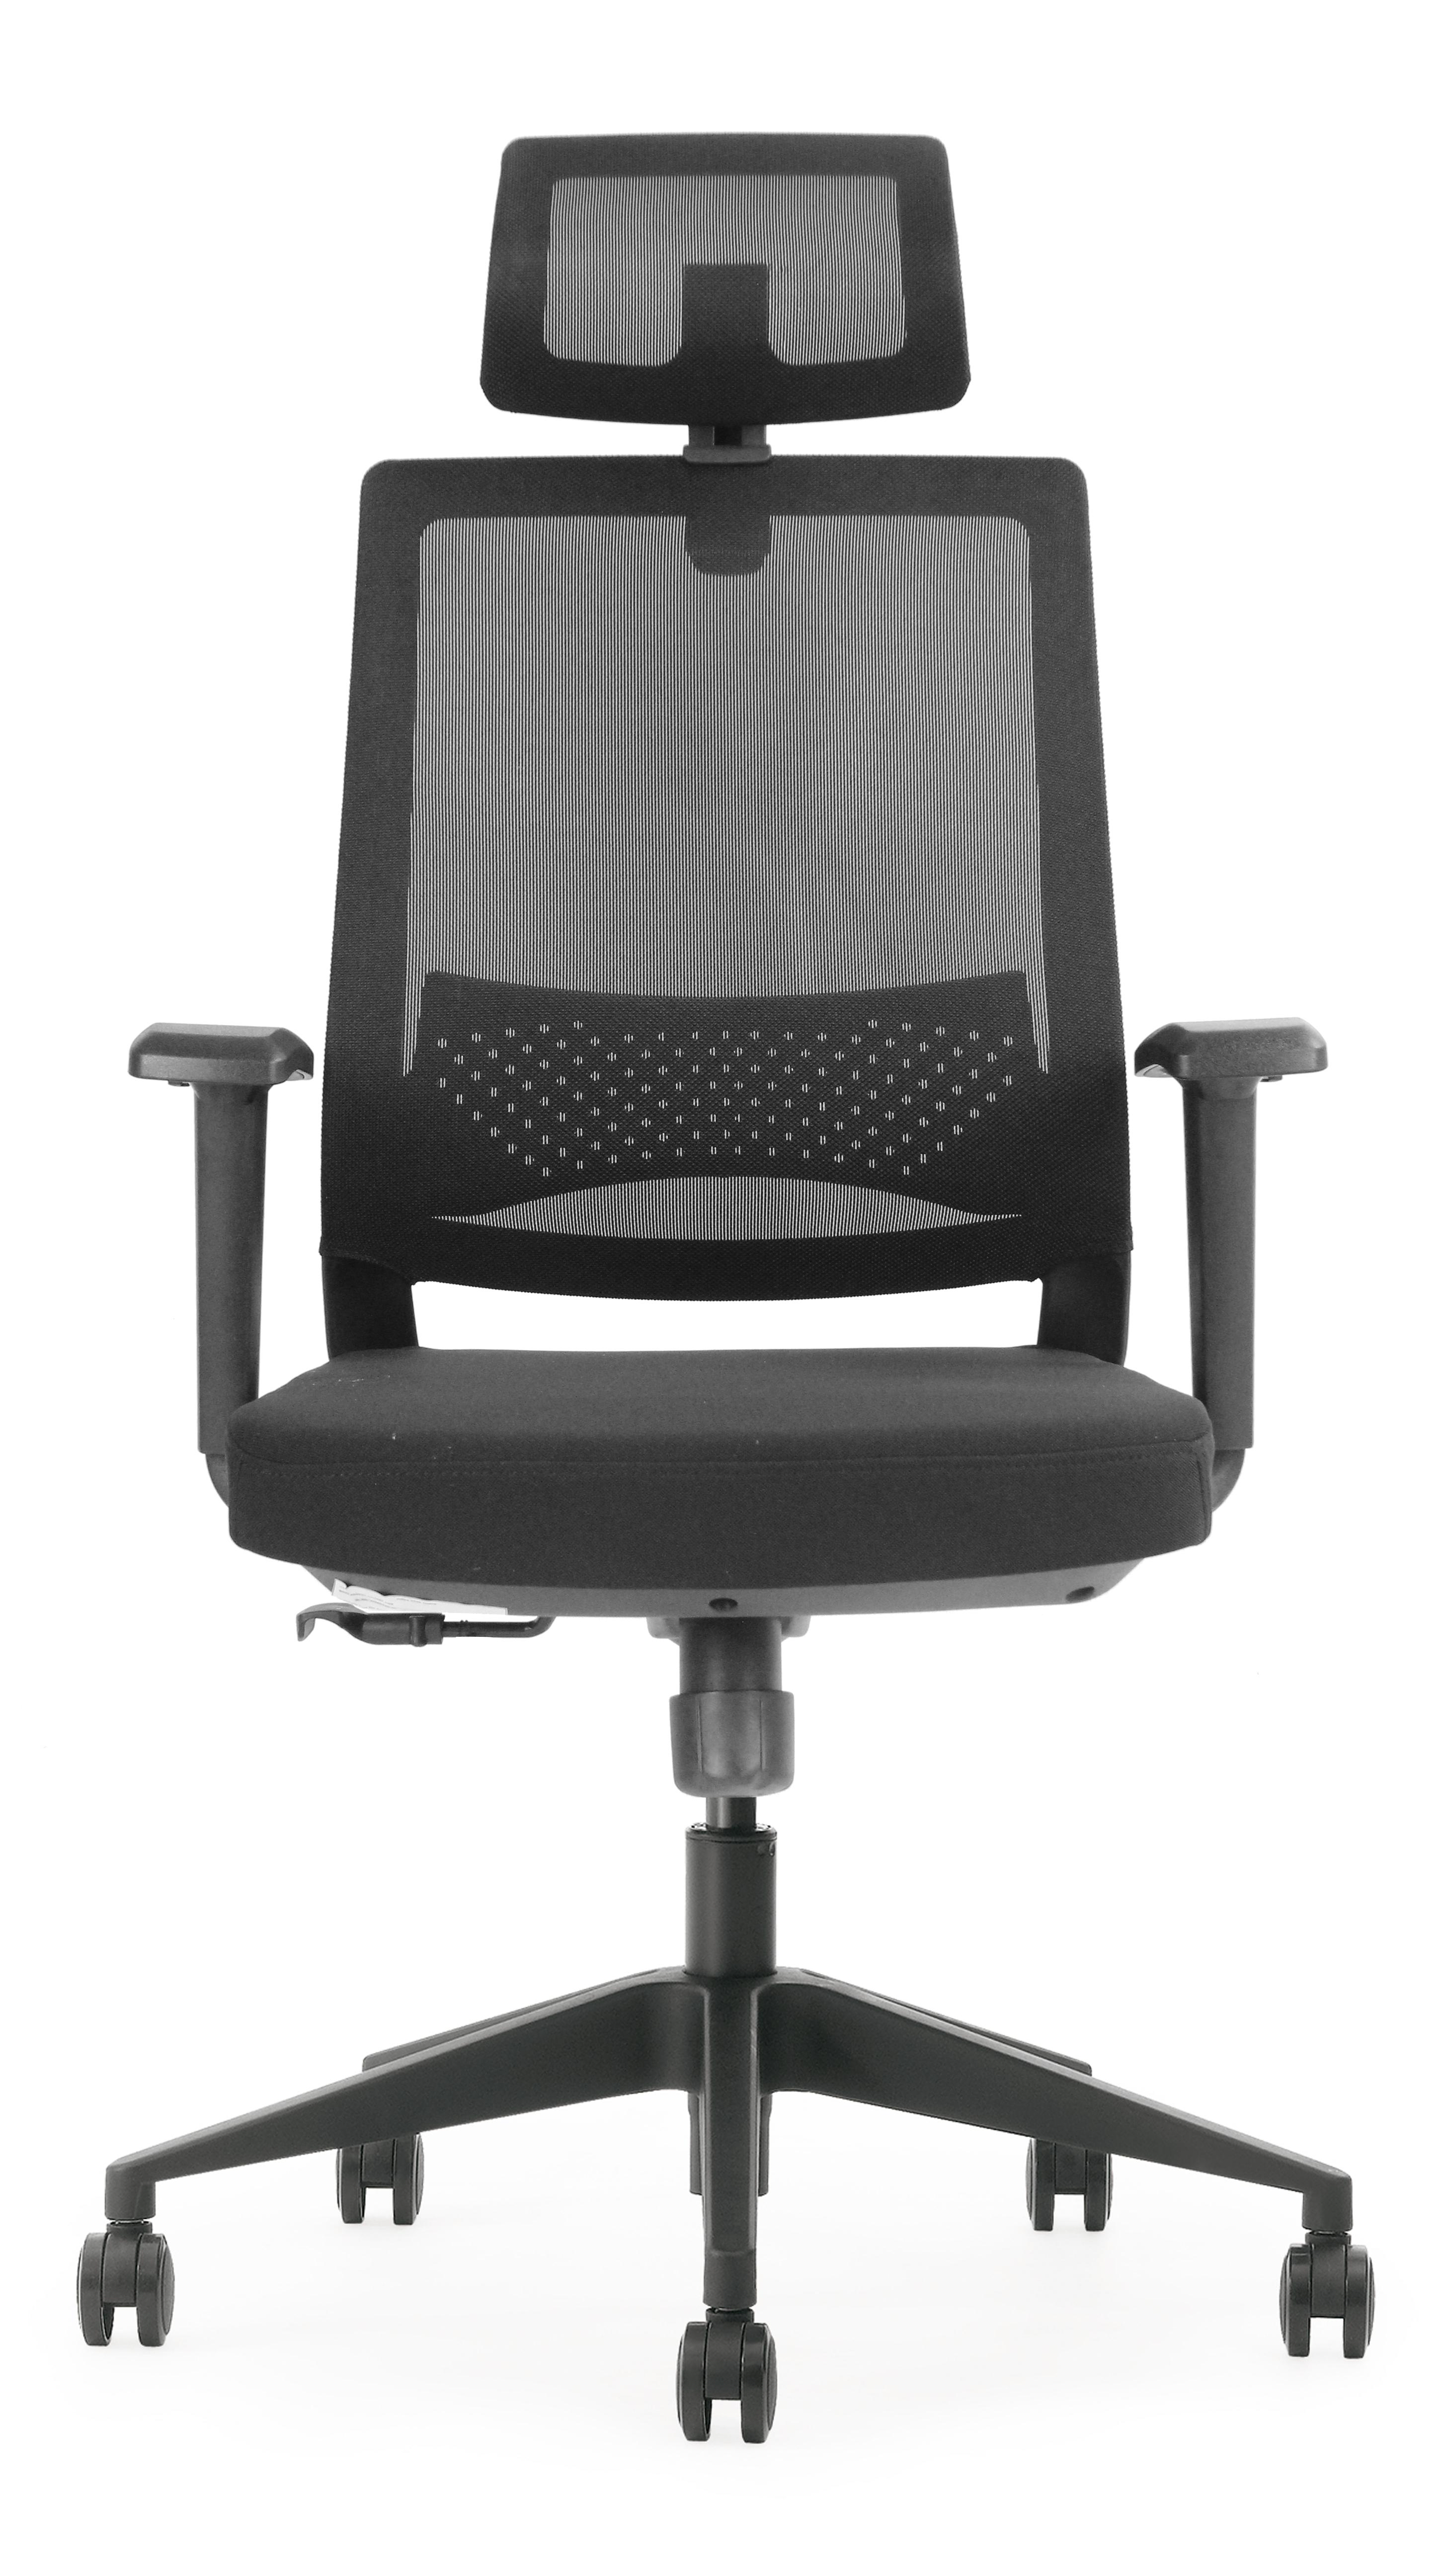 Mesh Back Ergonomic Office Desk Chair, Chair With Headrest Or Not